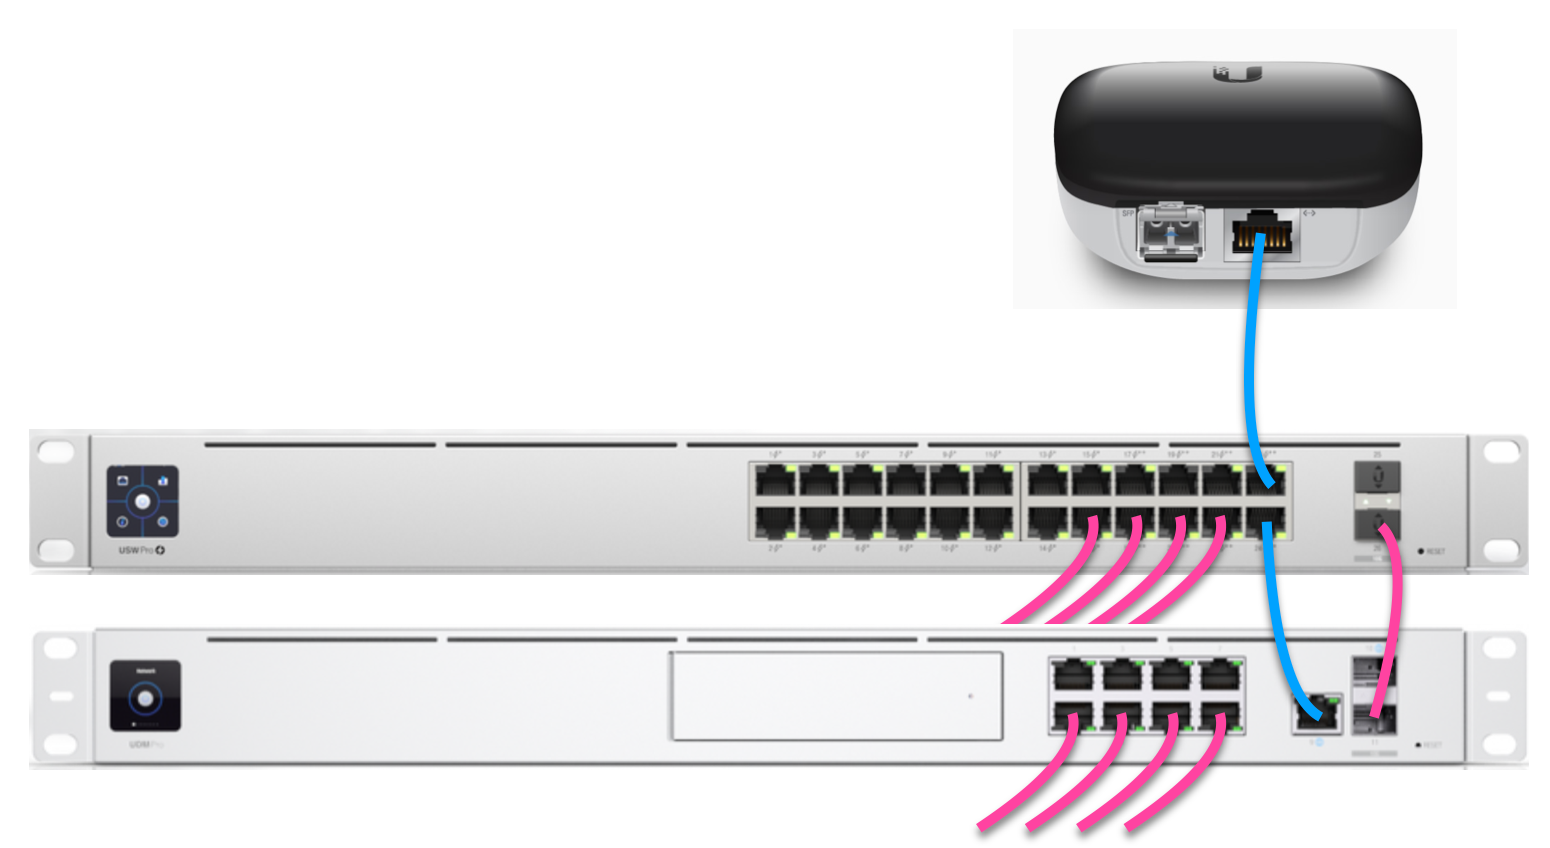 Pride Orderly Cloudy Possible to use Switch Pro as PoE injector for Fiber convertor on WAN? |  Ubiquiti Community